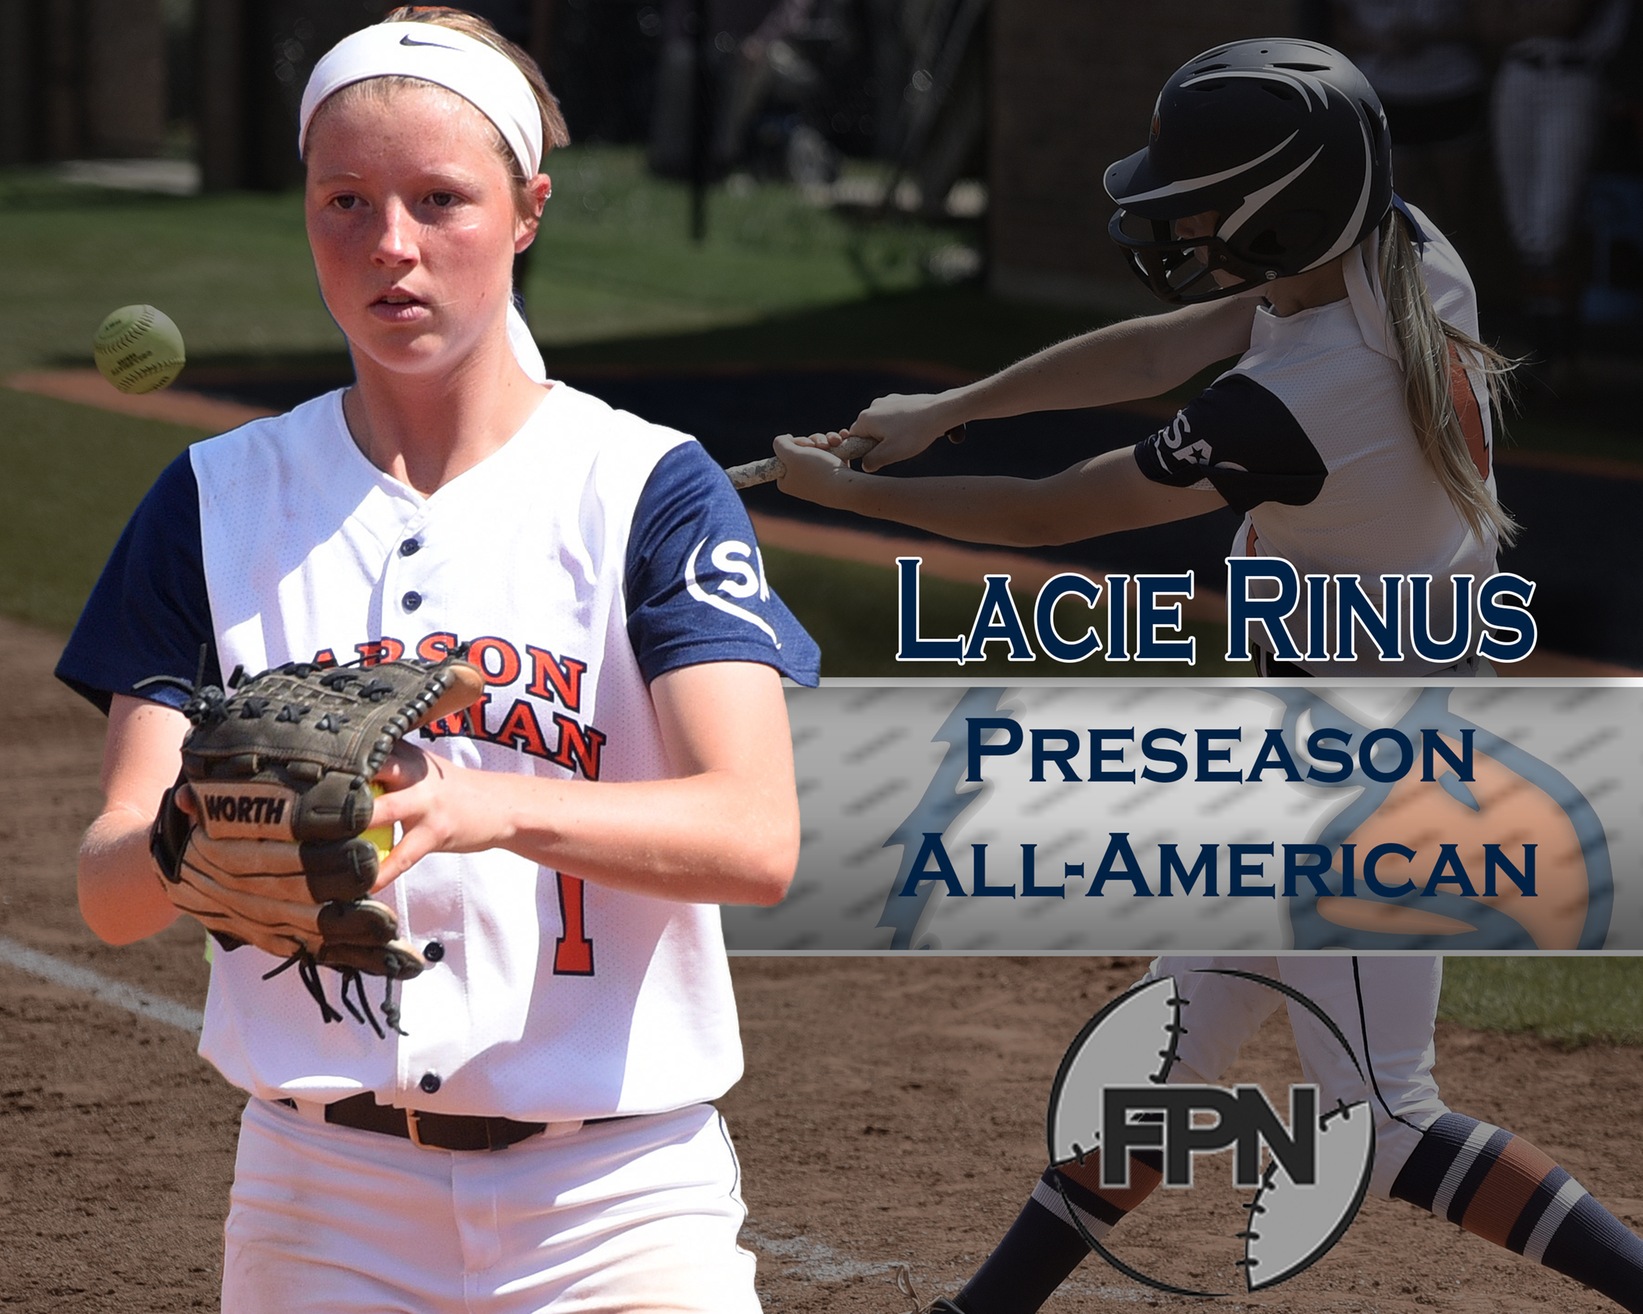 Fast Pitch News names Rinus to preseason All-America first team